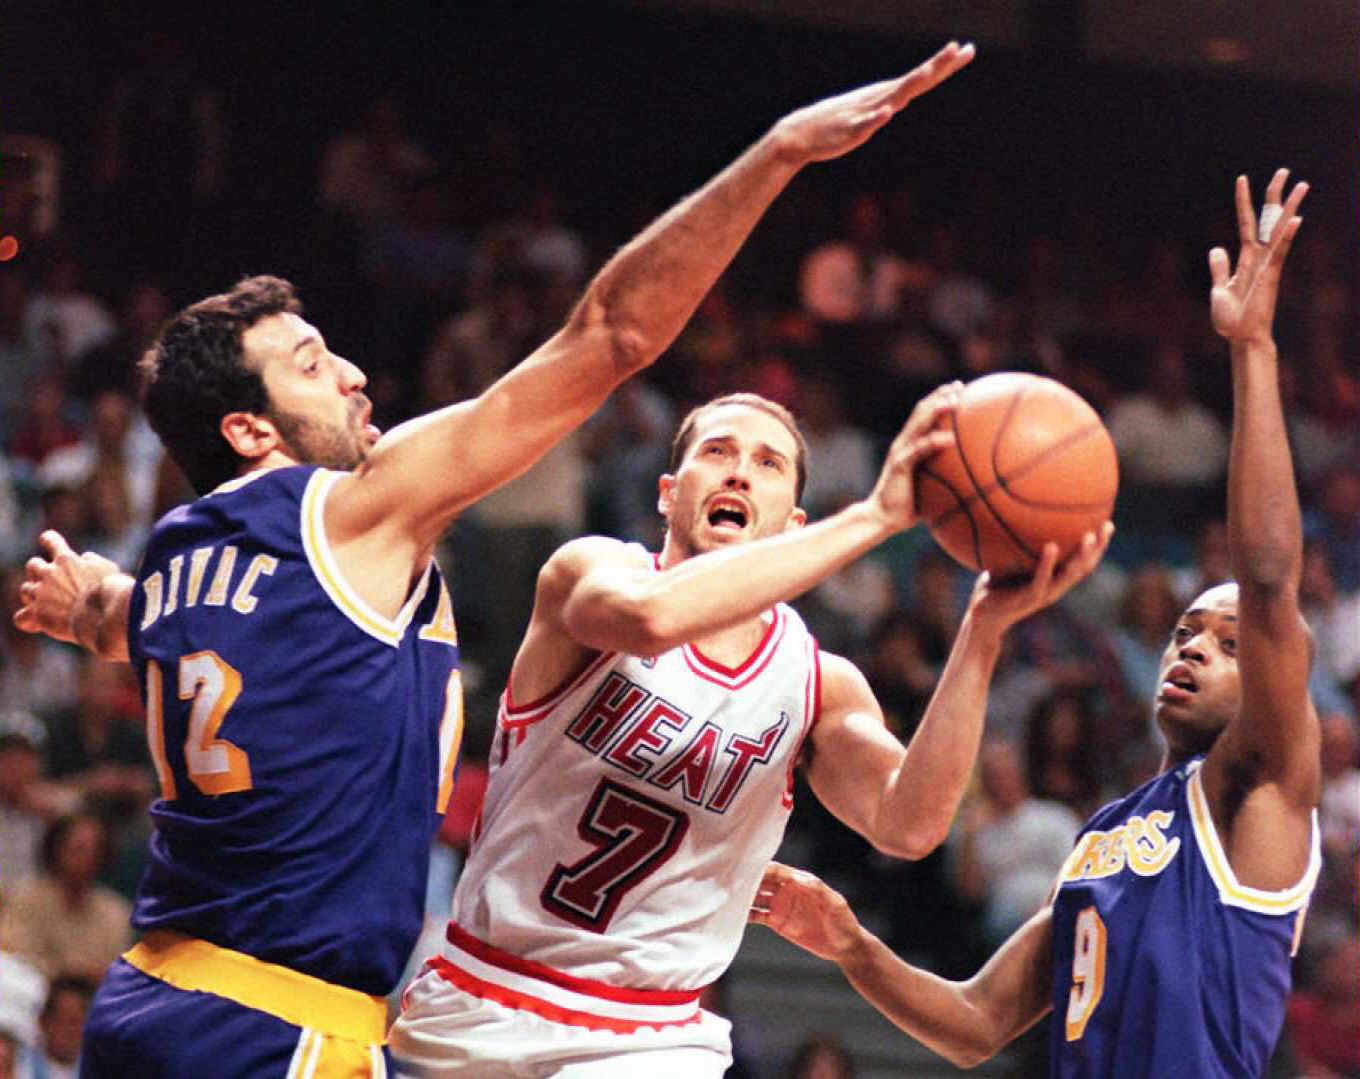 The Miami Heat's Rex Chapman (C) is defended by the Los Angeles Laker's center Vlade Divac (L) and guard Nick Van Exel (R) as he tries to get to the basket in their game 27 March at the Miami Arena. (AFP via Getty Images)